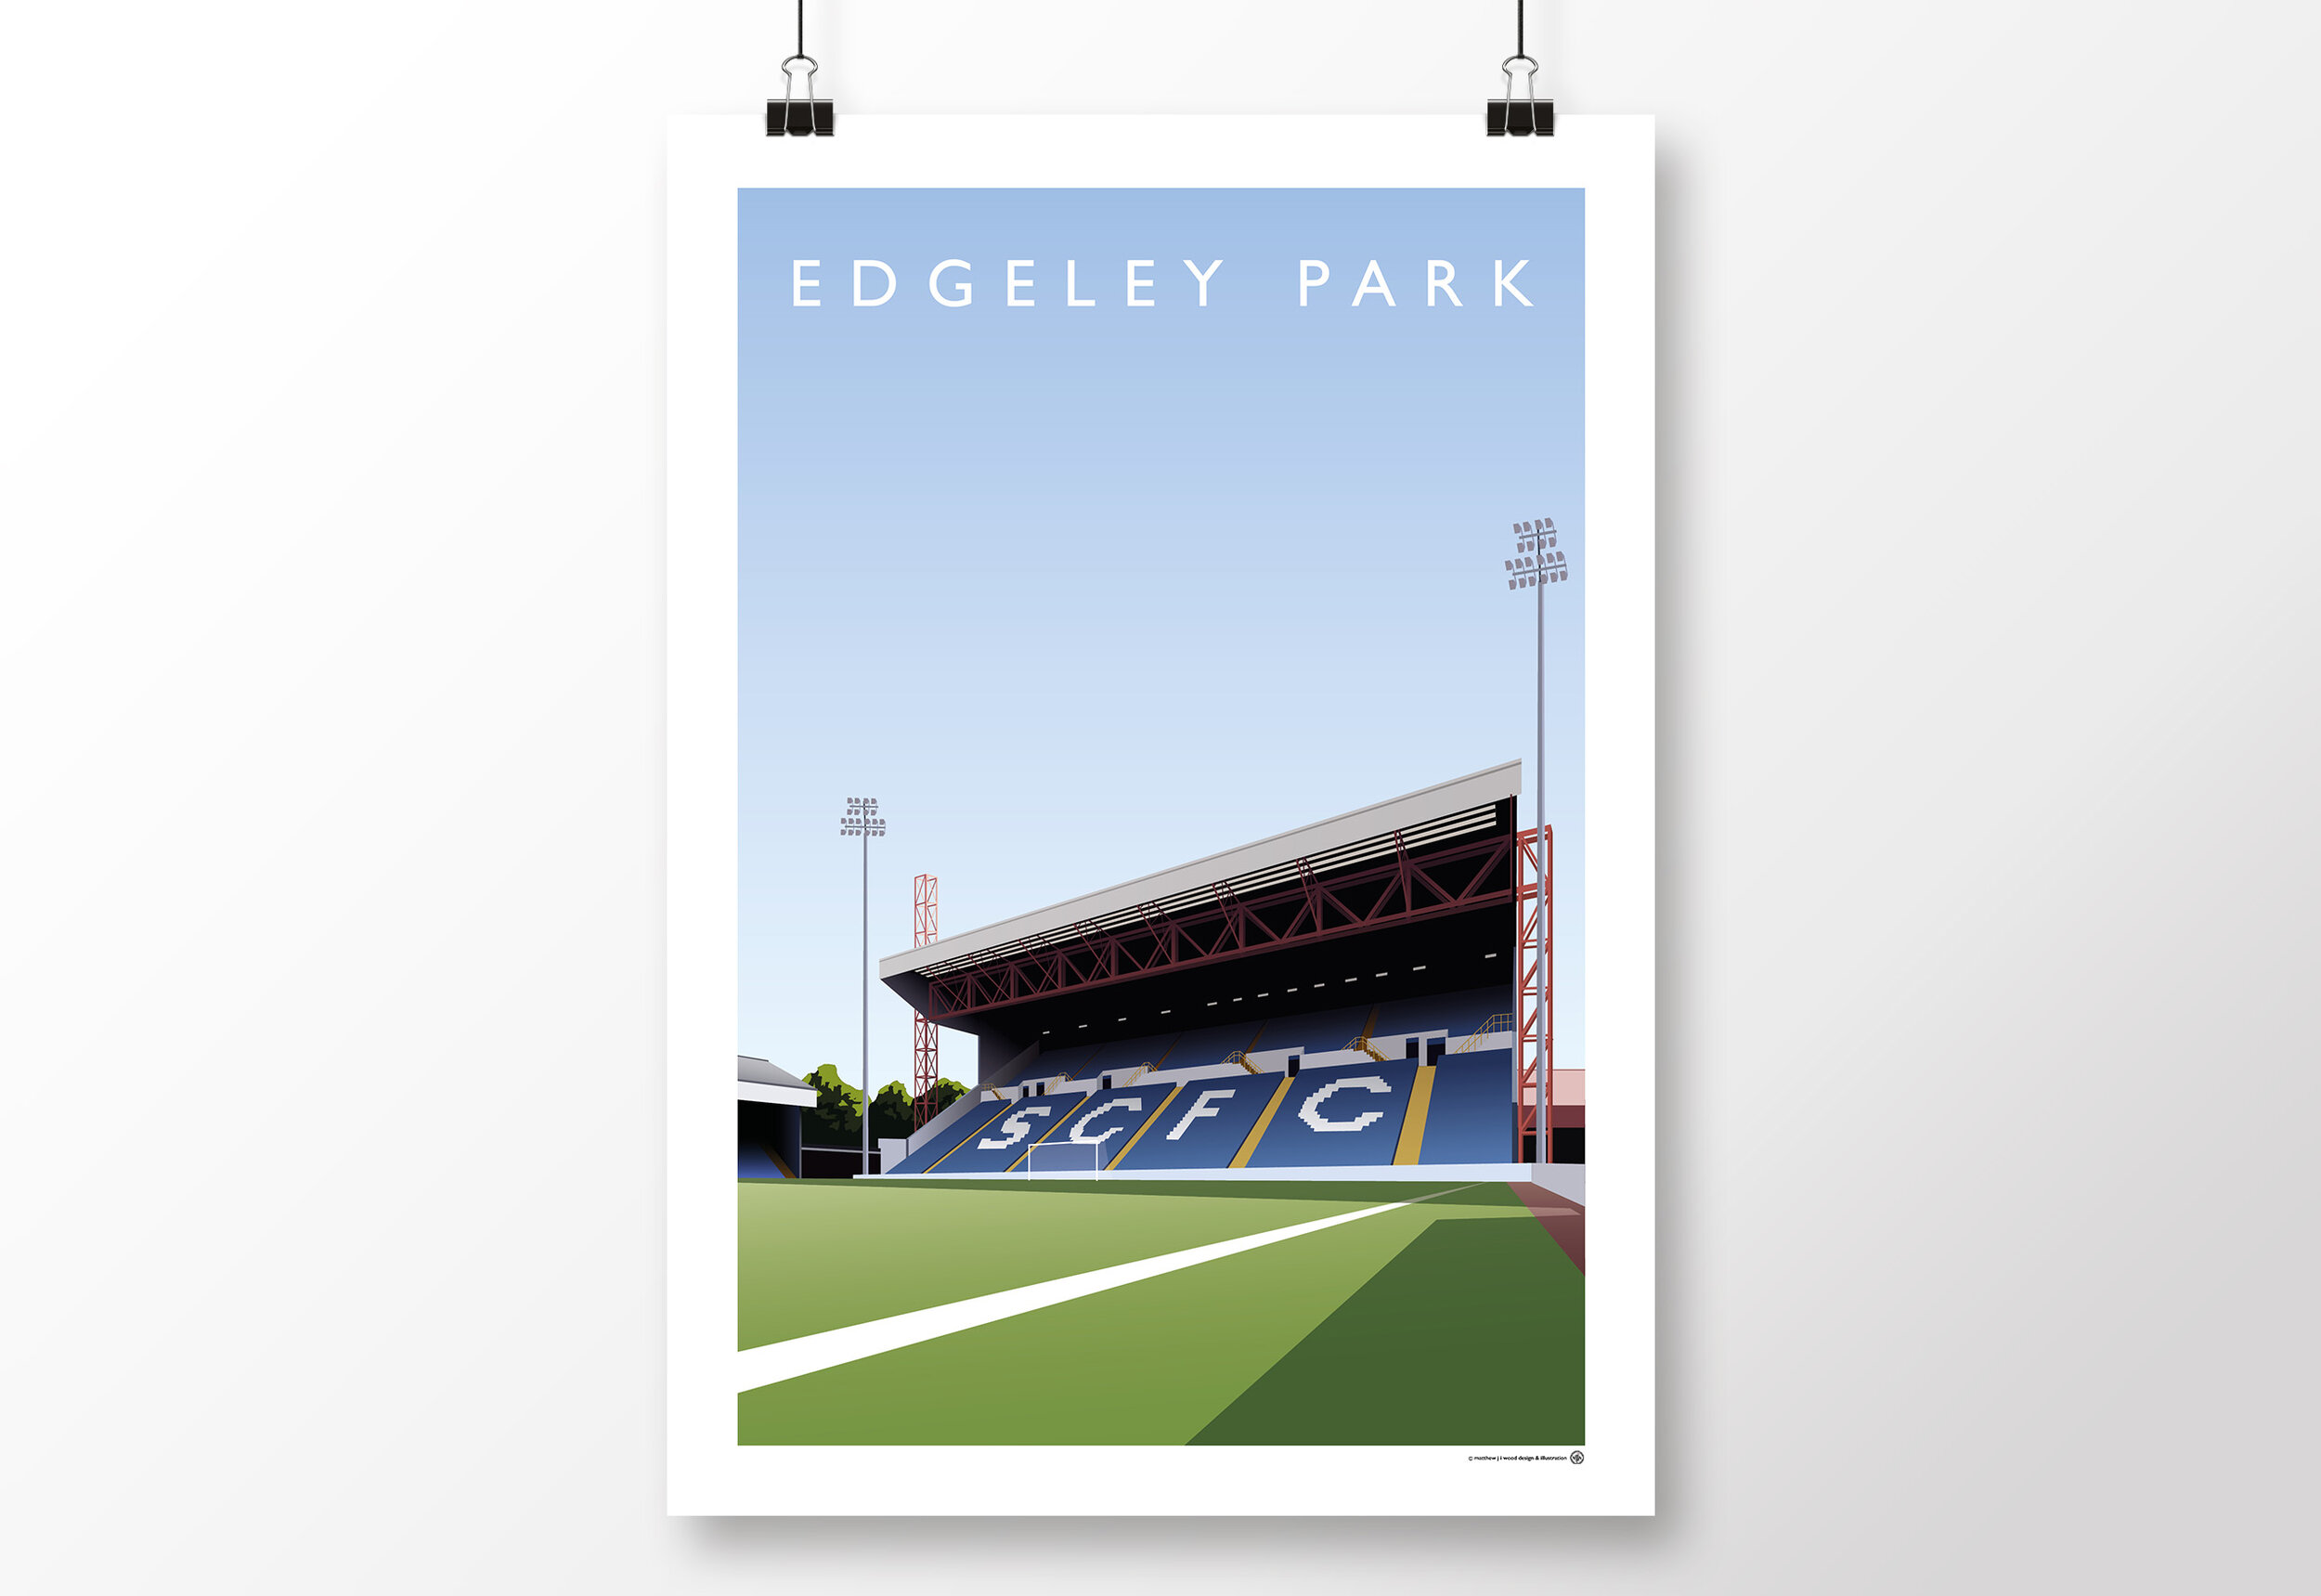 EDGELEY PARK 'HOME OF STOCKPORT COUNTY FC' REPLICA ROAD SIGN 